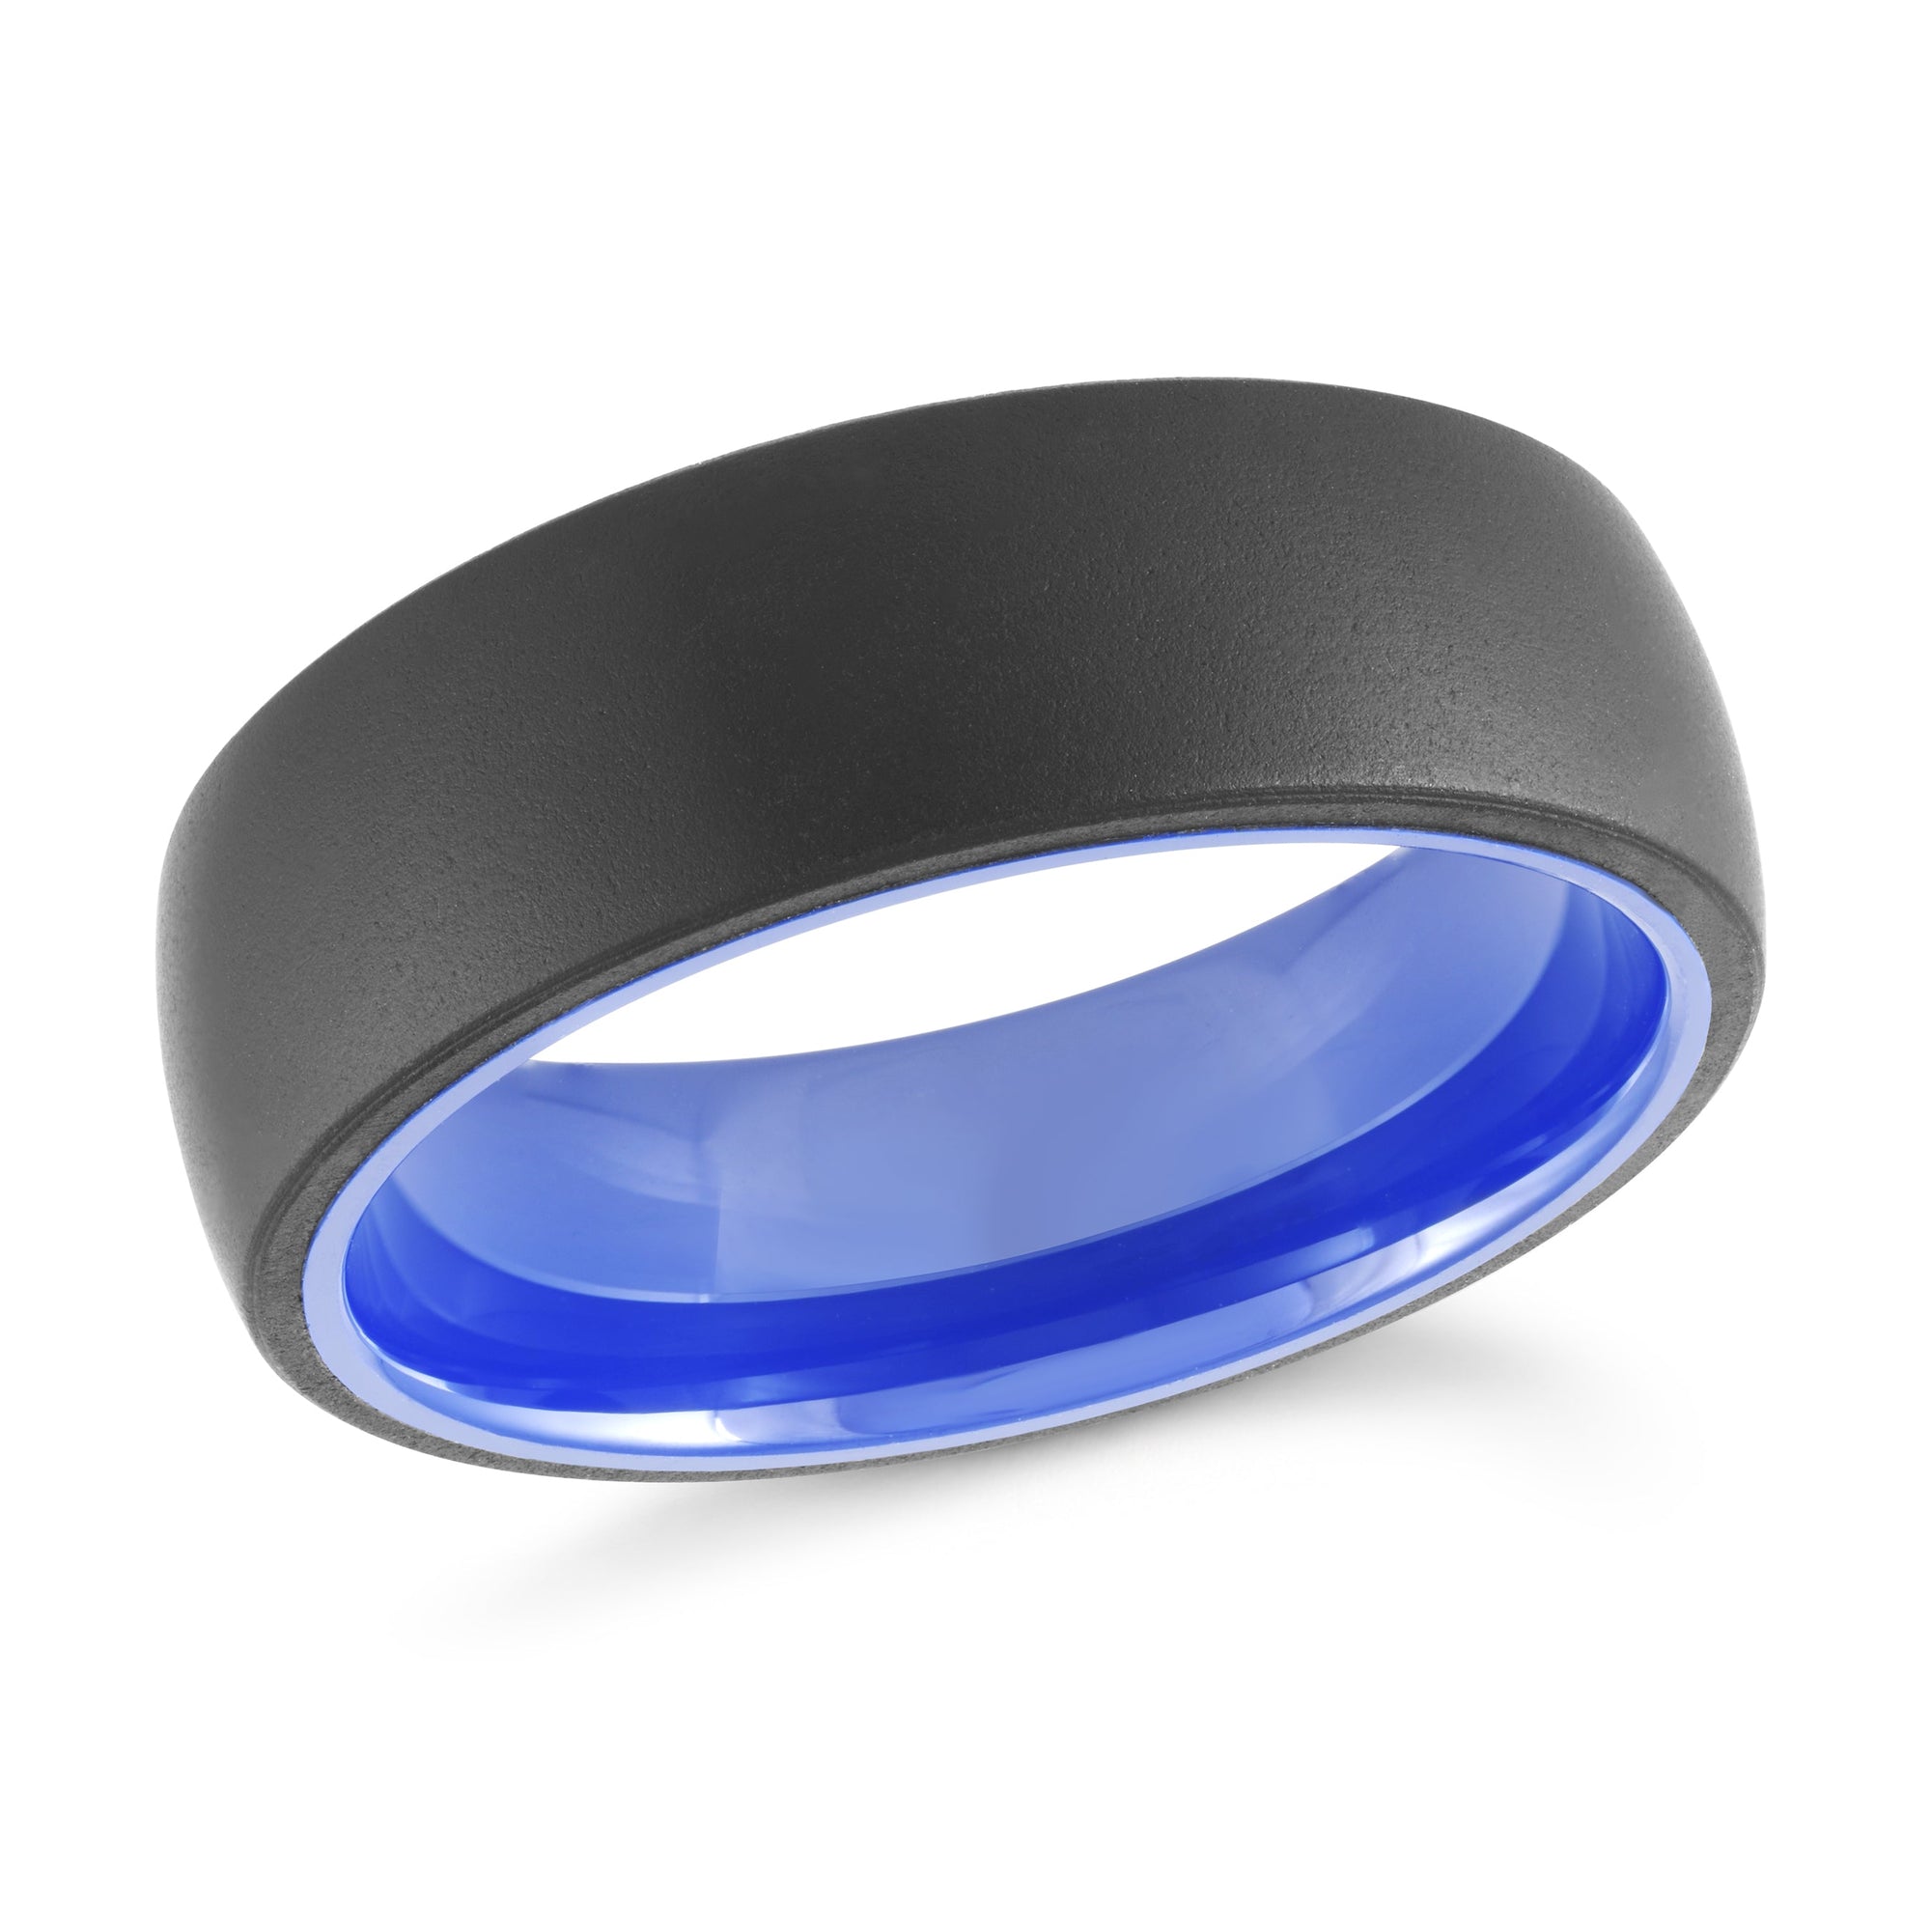 Black Tungsten Plated 8mm Comfort Fit Wedding Band with Blue Ceramic